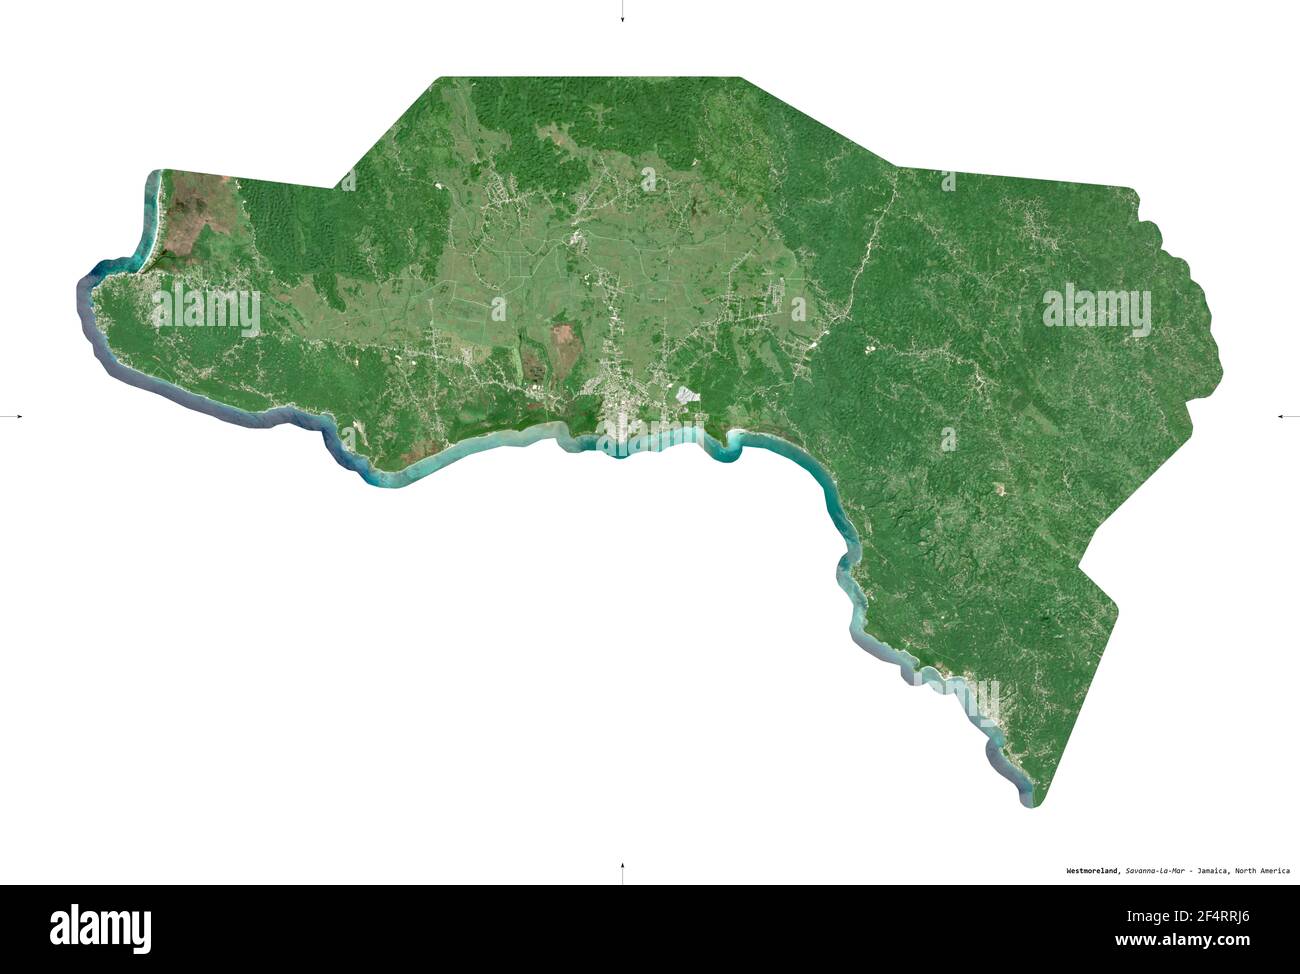 Westmoreland, parish of Jamaica. Sentinel-2 satellite imagery. Shape isolated on white. Description, location of the capital. Contains modified Copern Stock Photo